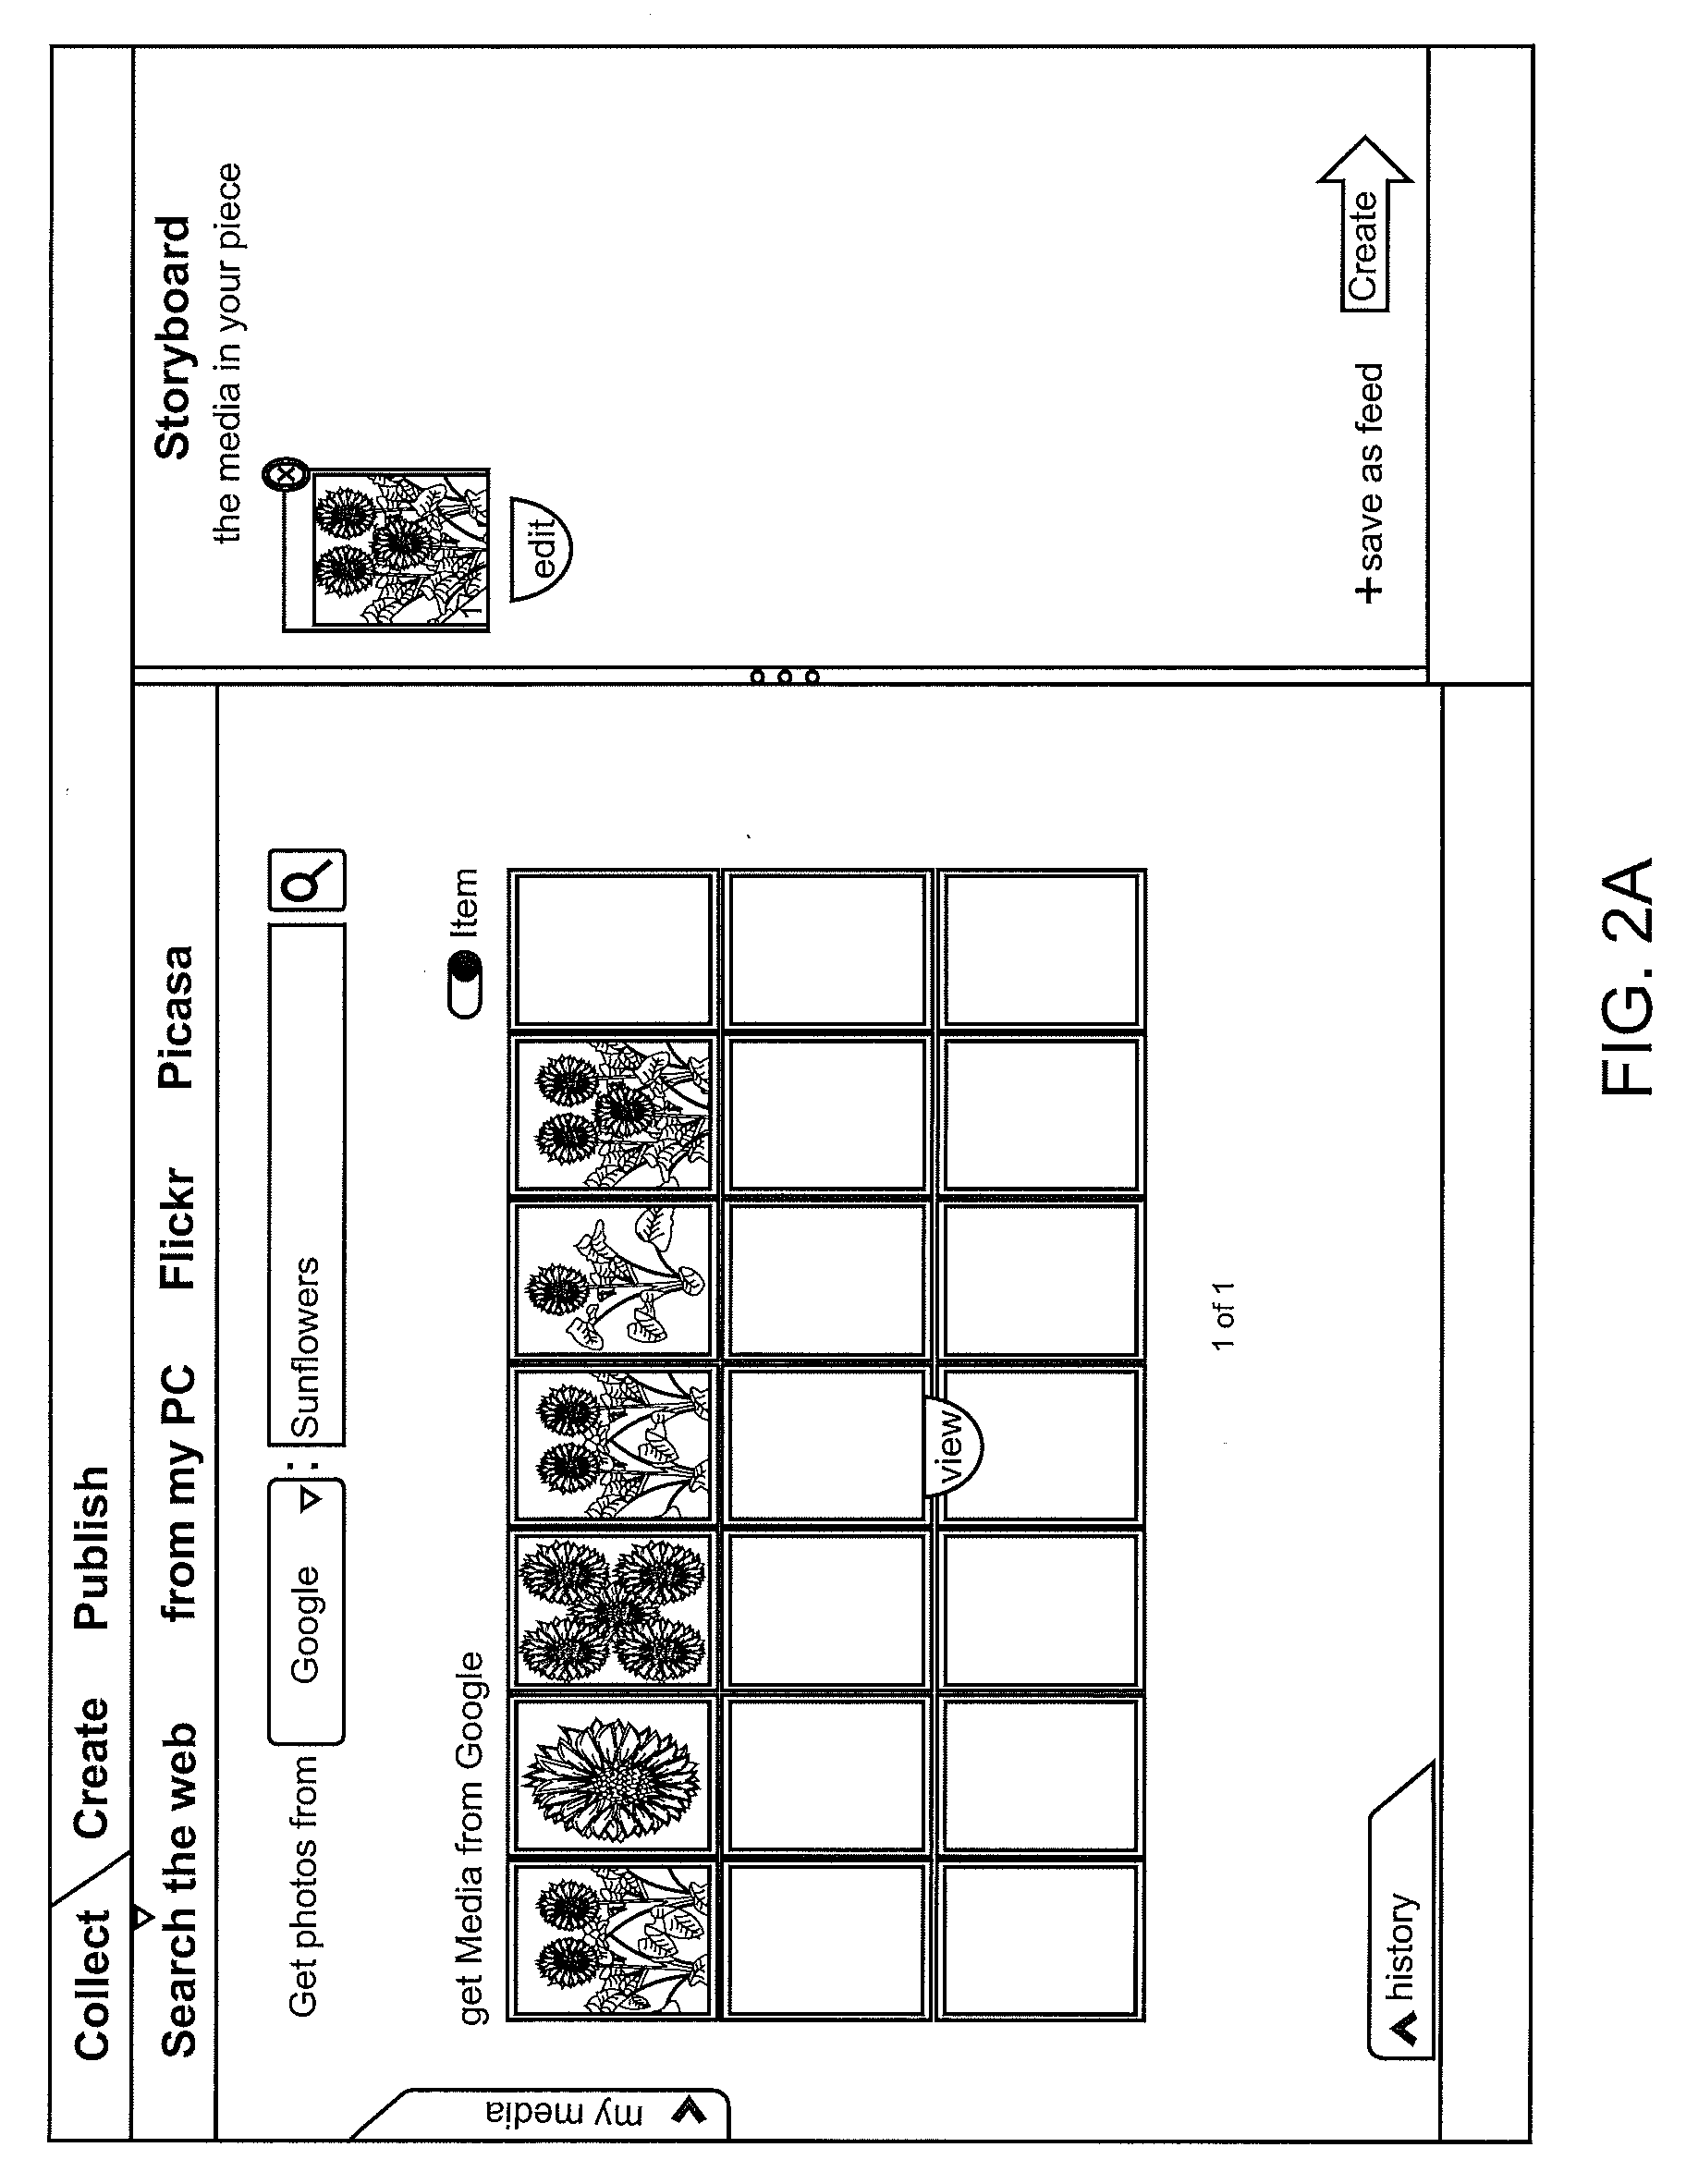 System and methods for automatic media population of a style presentation